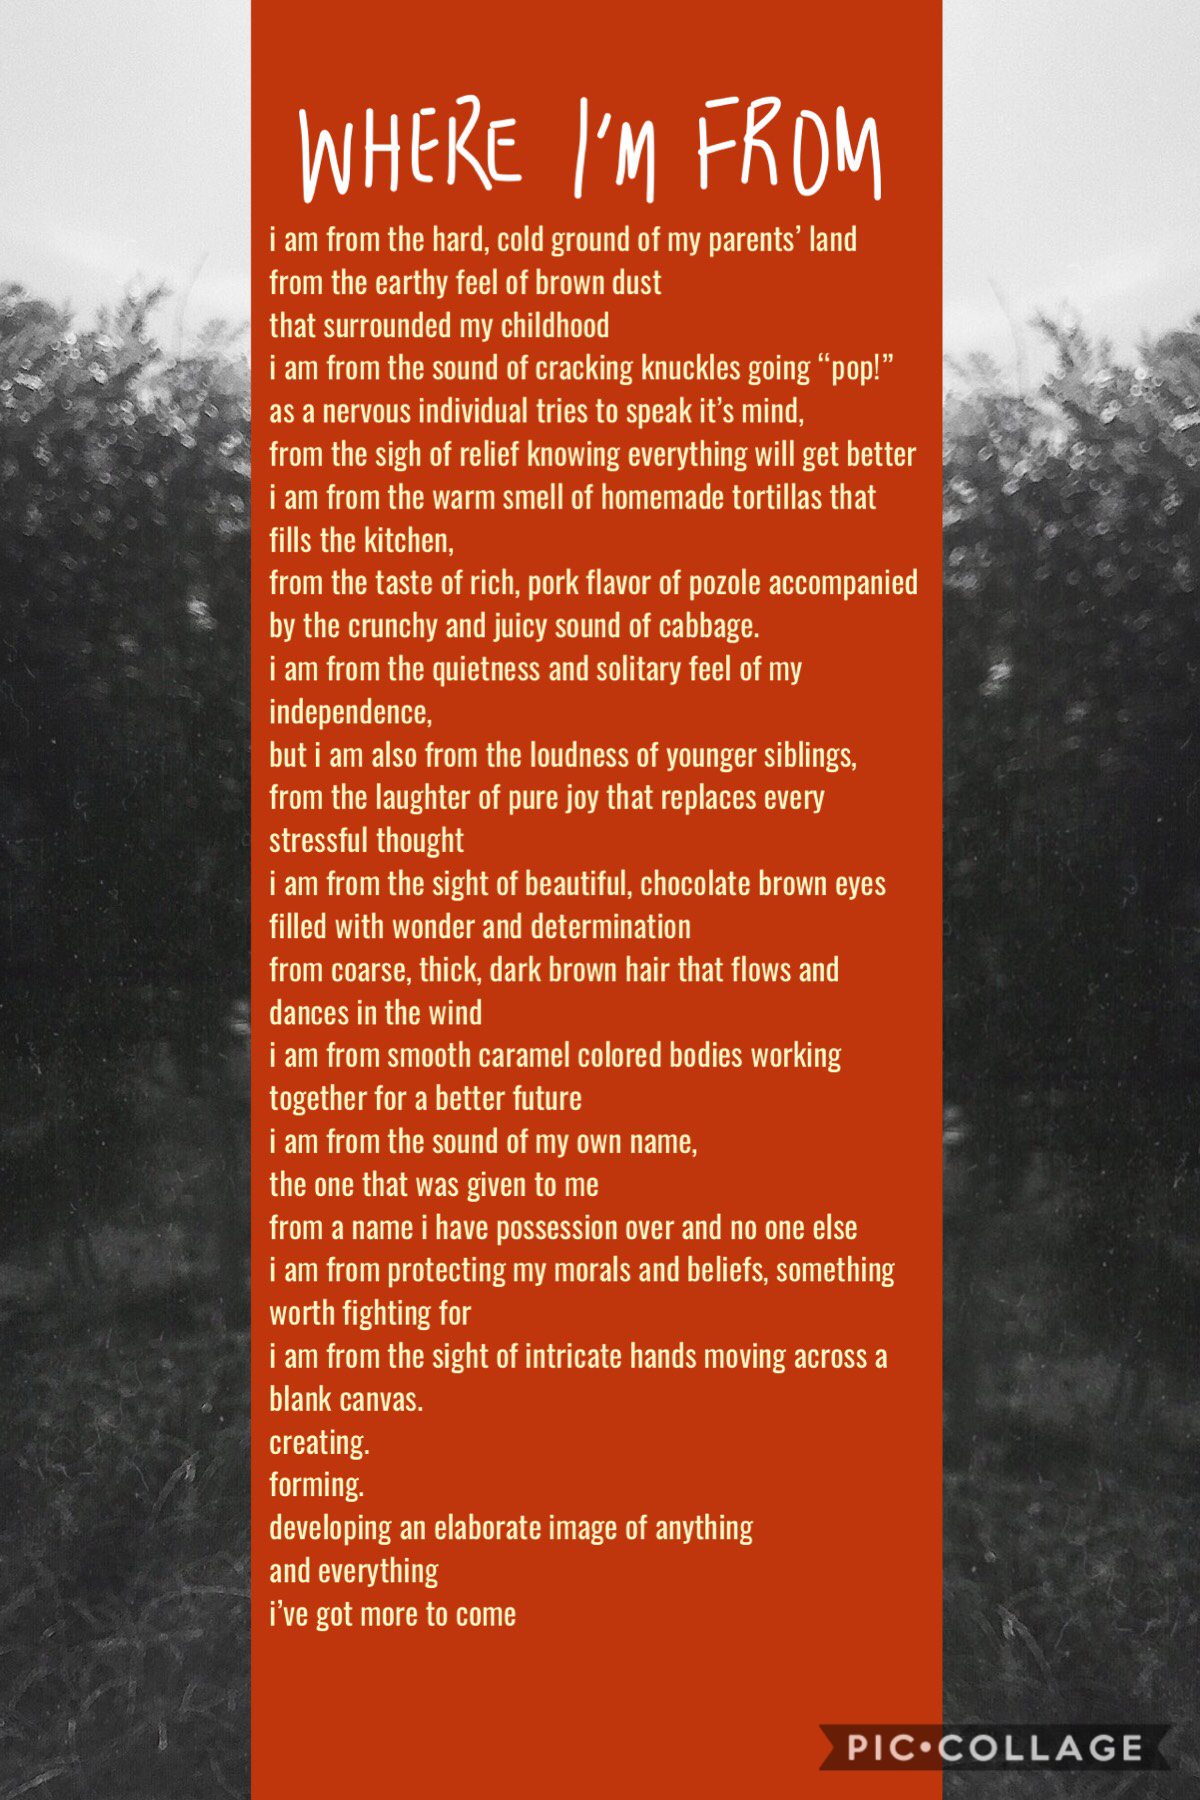 tap, my dudes
this was a writing assignment for my college composition class.
i tried to put some thought into it
it’s kind of a sensory poem 
hope you learn some things about me